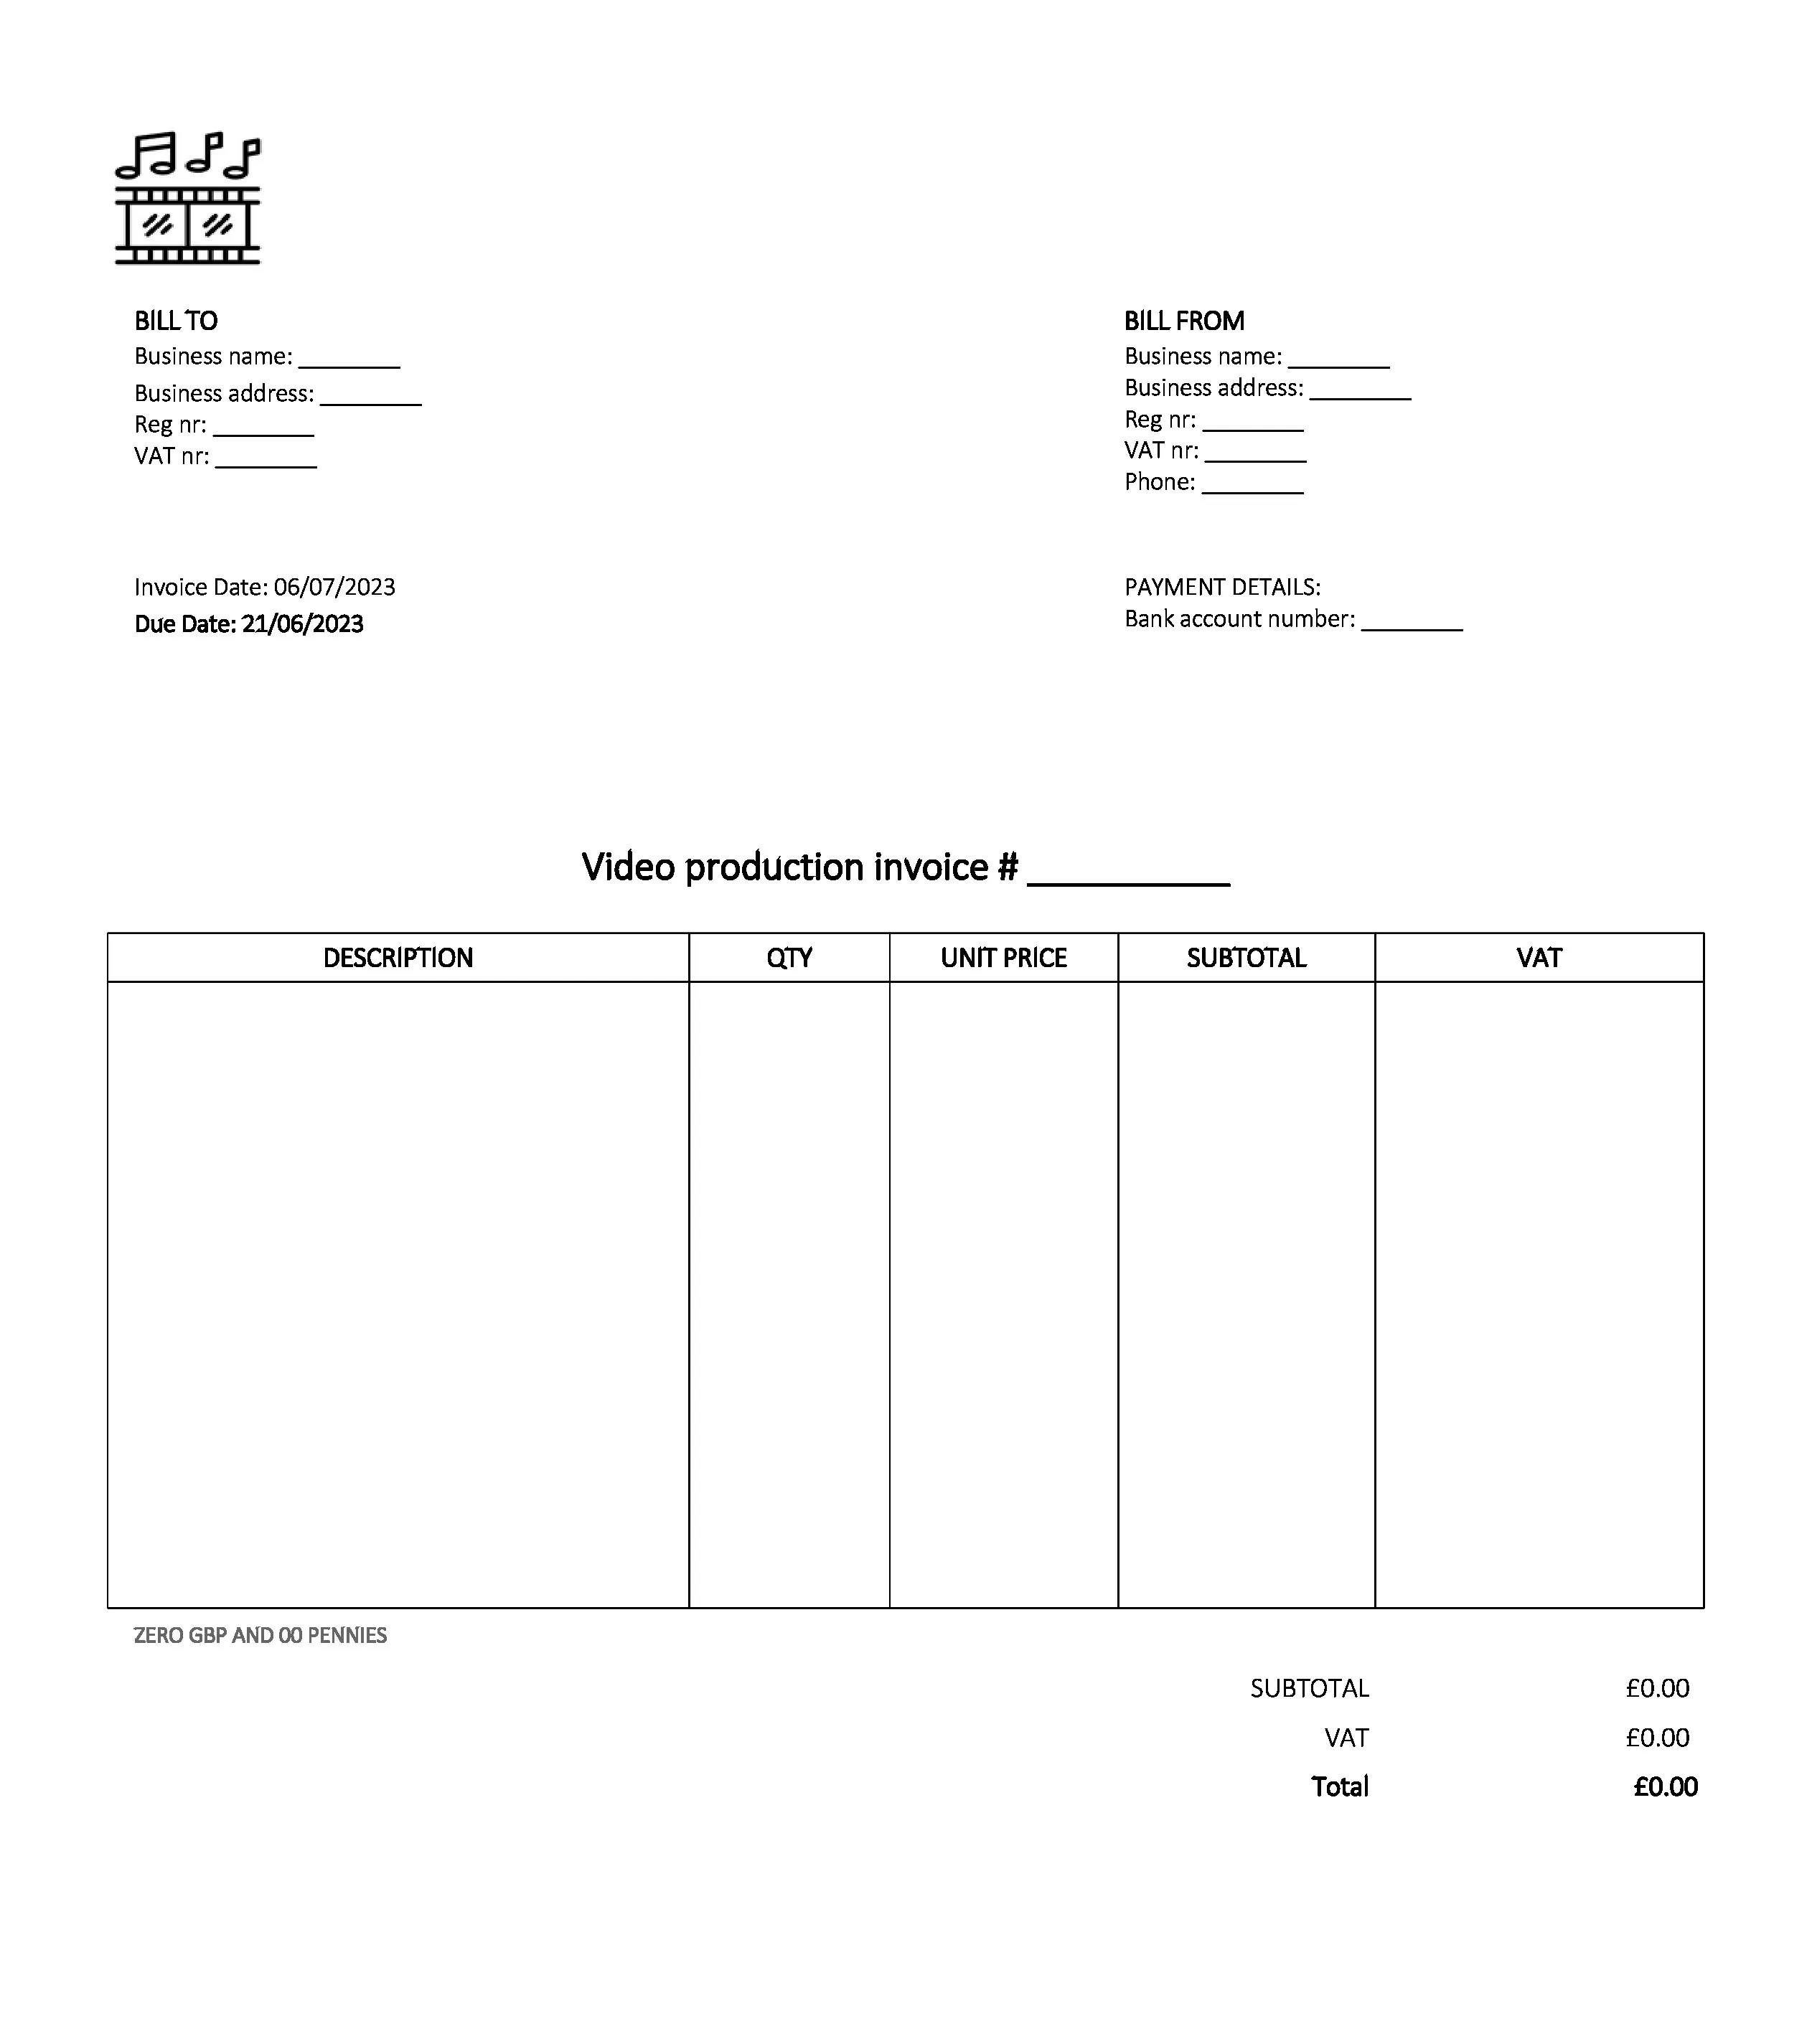 email deliverable video production invoice template UK Excel / Google sheets